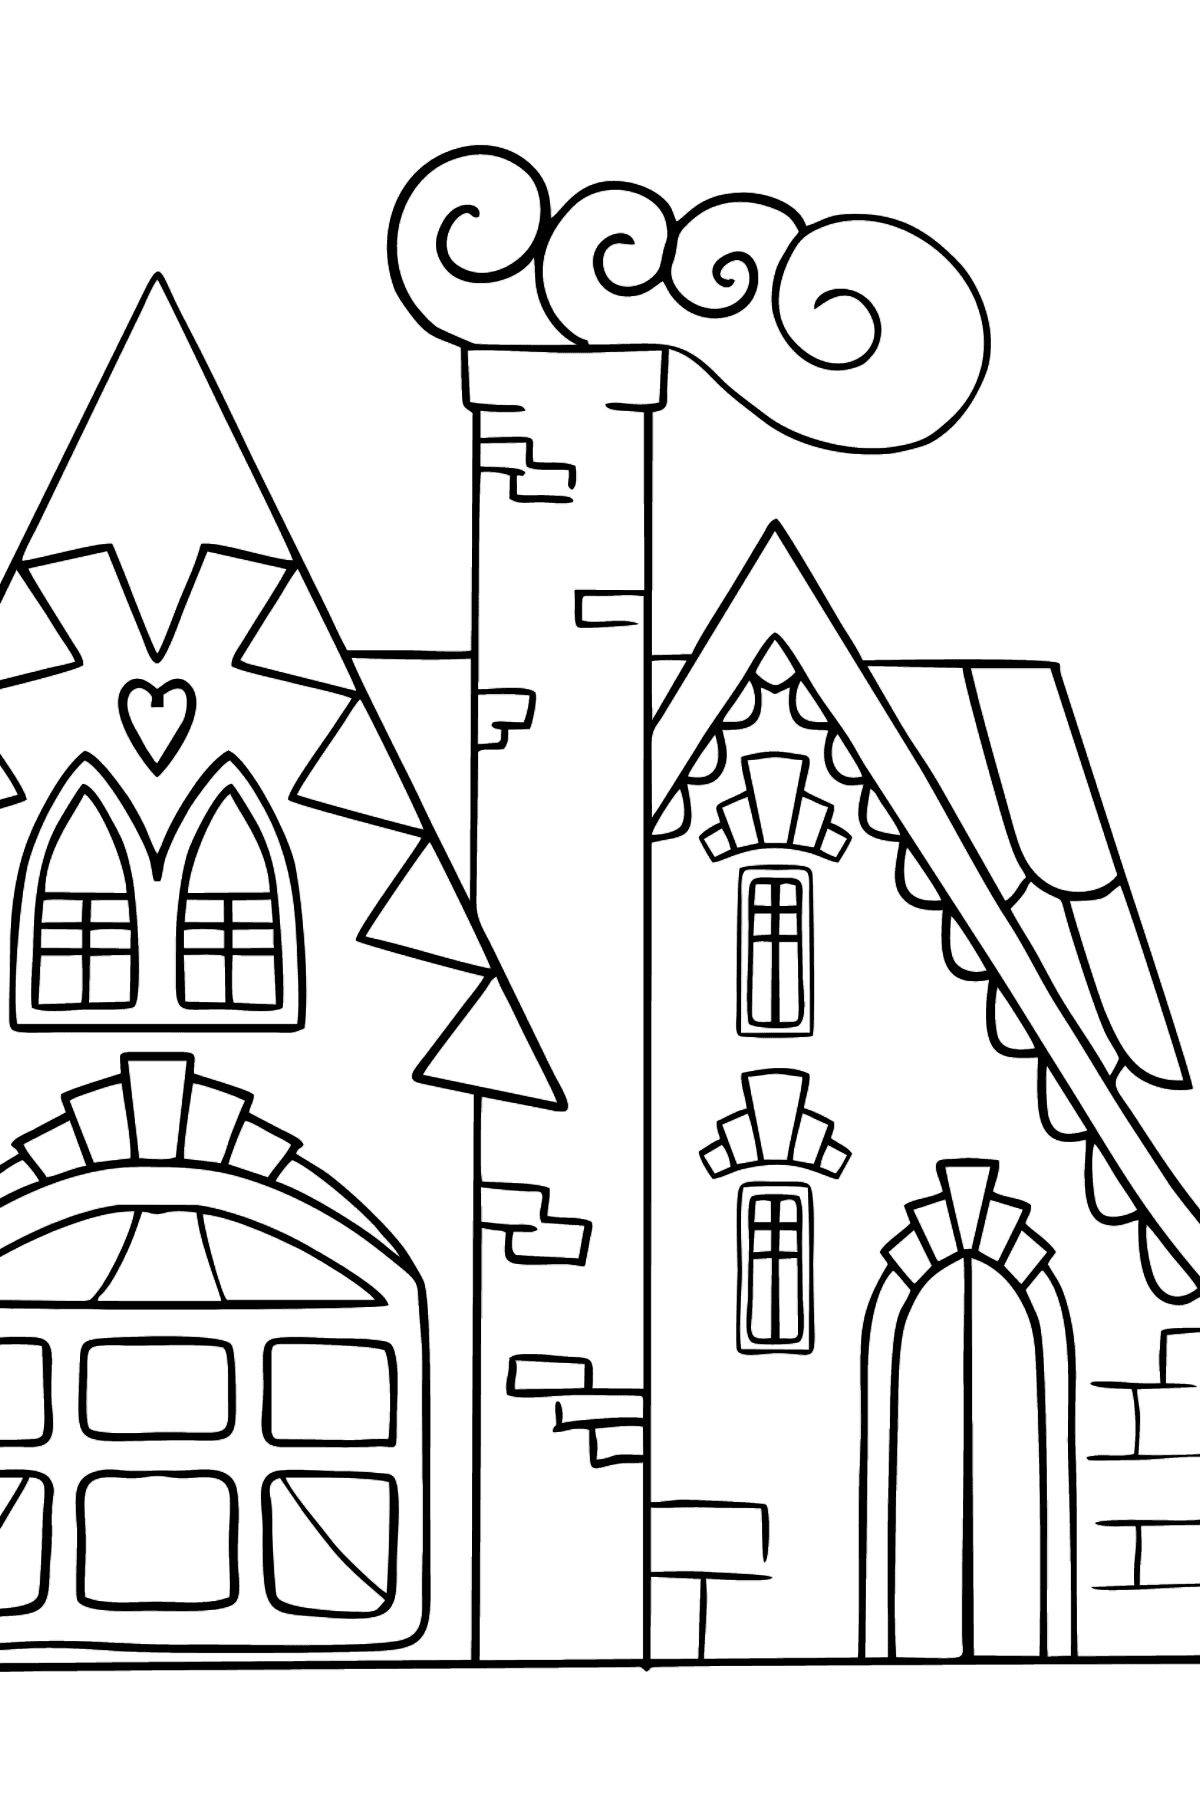 Simple Coloring Page - A Charming House - Coloring Pages for Kids